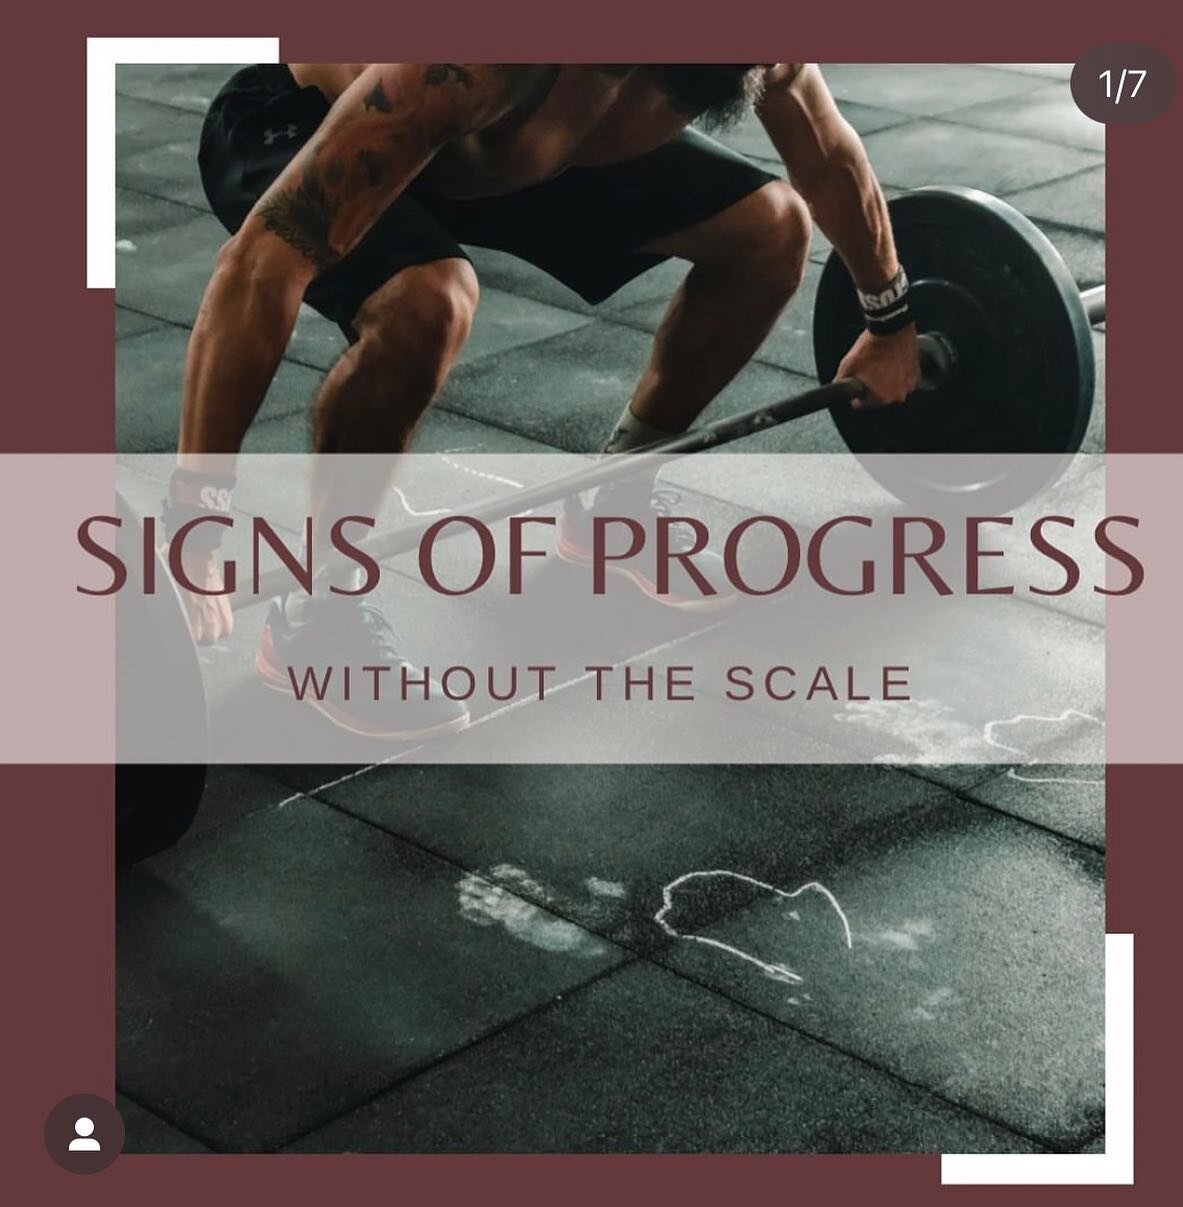 Thank you so much @mindfullynourishedwellness for sharing this message with us here at The Loft Private Fitness! It is such a great reminder to everyone embarking on a new fitness journey. Not all progress can be seen in the mirror right away and thi